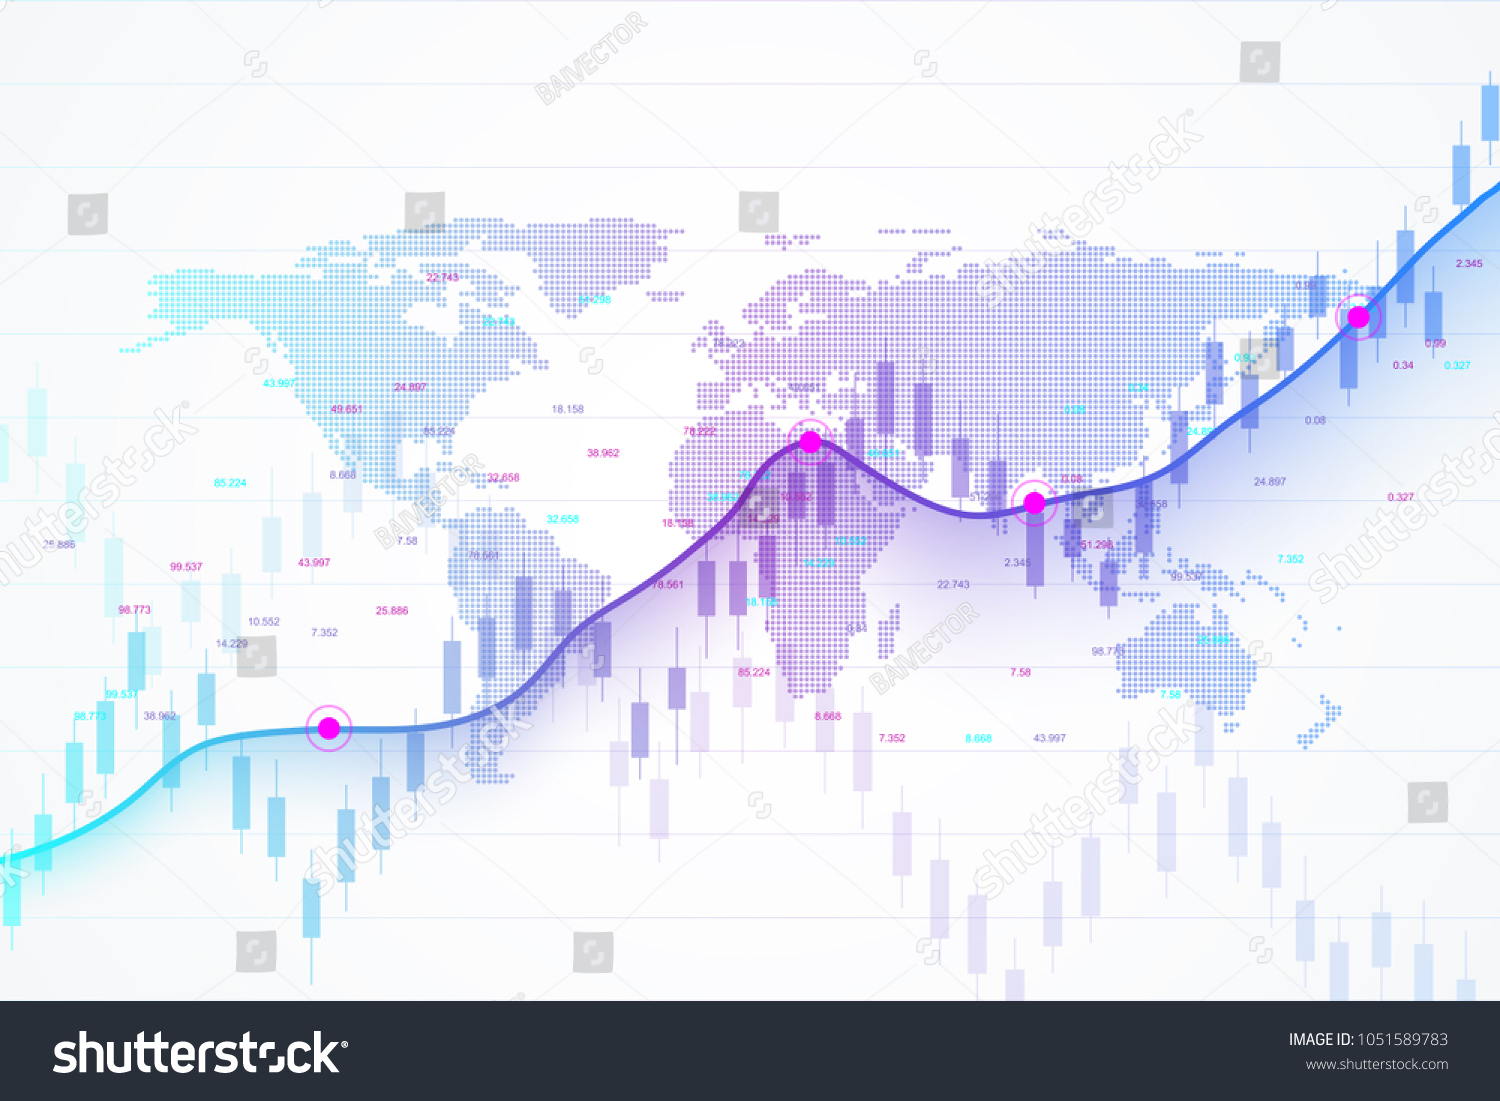 SVG of Stock market and exchange. Candle stick graph chart of stock market investment trading. Stock market data. Bullish point, Trend of graph. Vector illustration svg